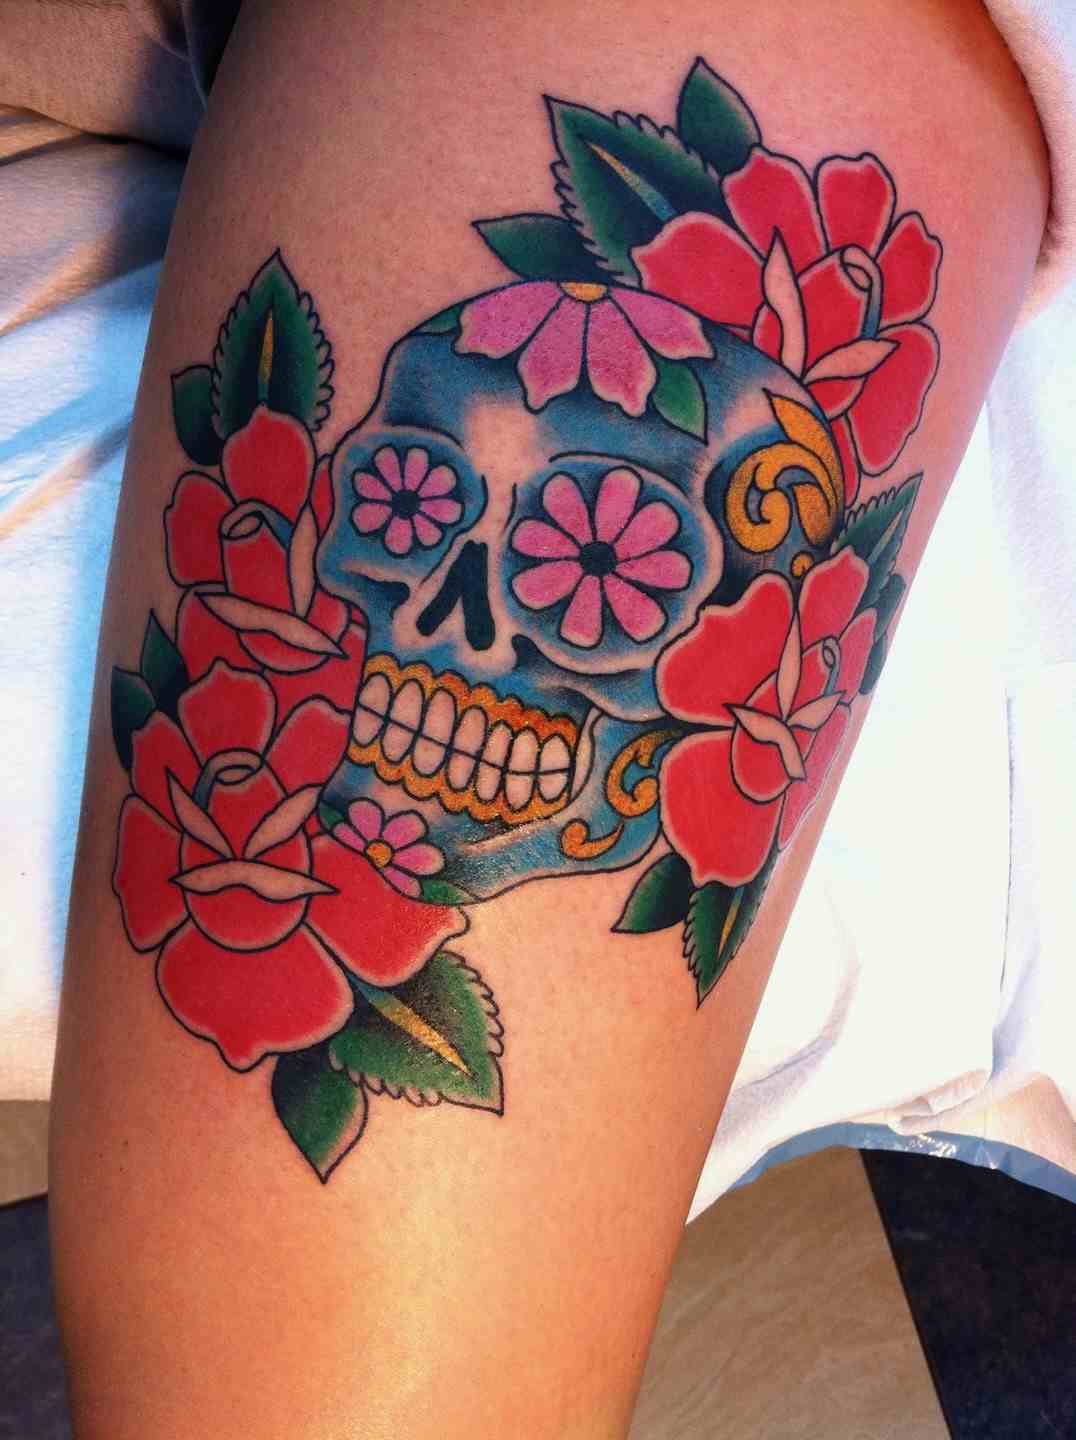 Day of the dead skull tattoo